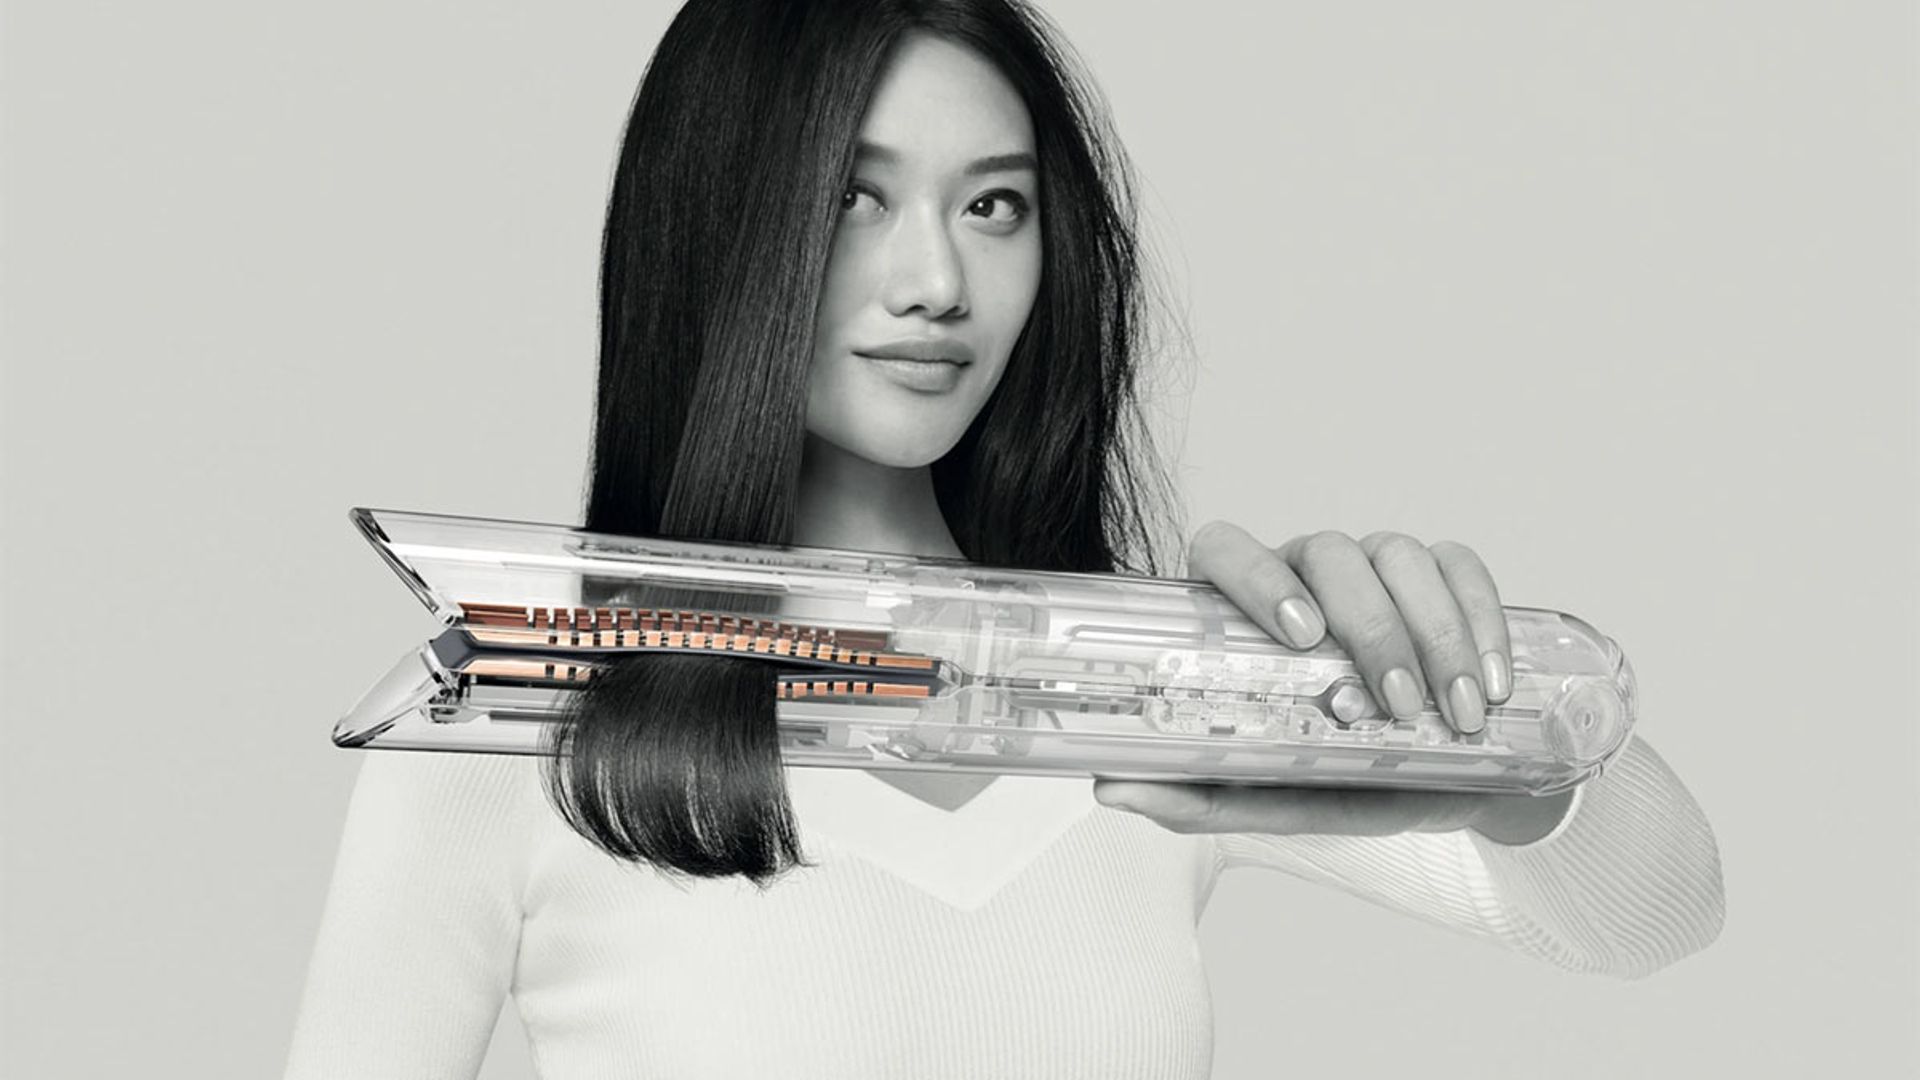 Dyson Corrale hair straightener review: Is it worth the £399 price tag?